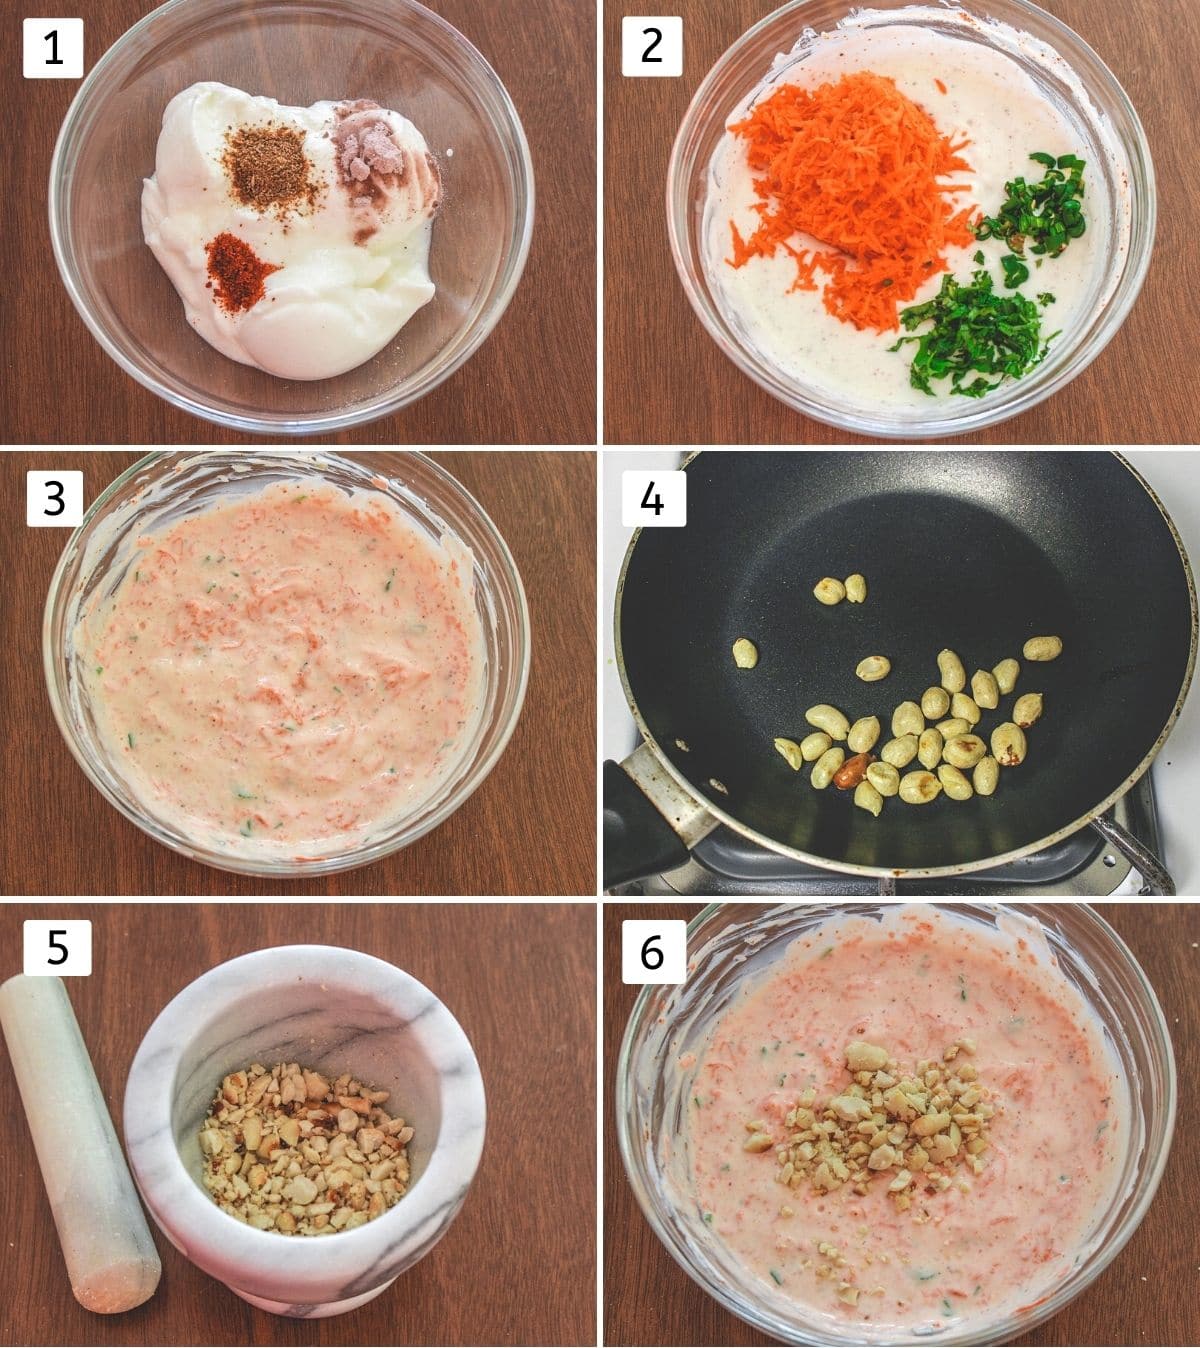 Collage of 6 steps showing mixing spices, carrot into the yogurt, roasting, crushing peanuts and adding to raita.